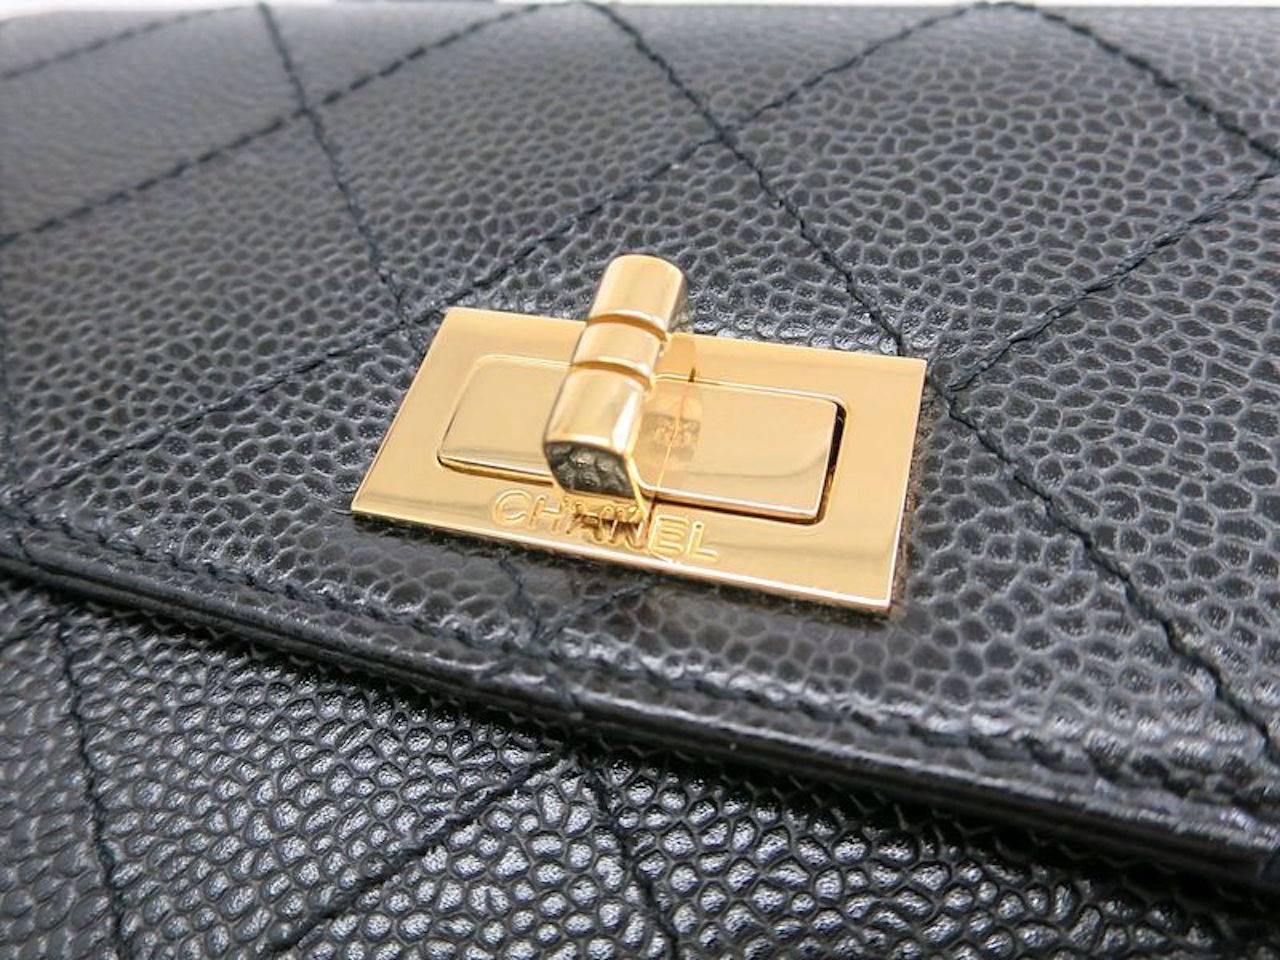 CURATOR'S NOTES

Chanel Black Caviar Leather Gold Kelly Style Box Top Handle Satchel Bag in Box  

Pfff! Hermes has nothing on me.  Gorgeous Chanel Kelly Style bag.

Caviar leather
Gold hardware
Turnlock closure
Made in France
Date code